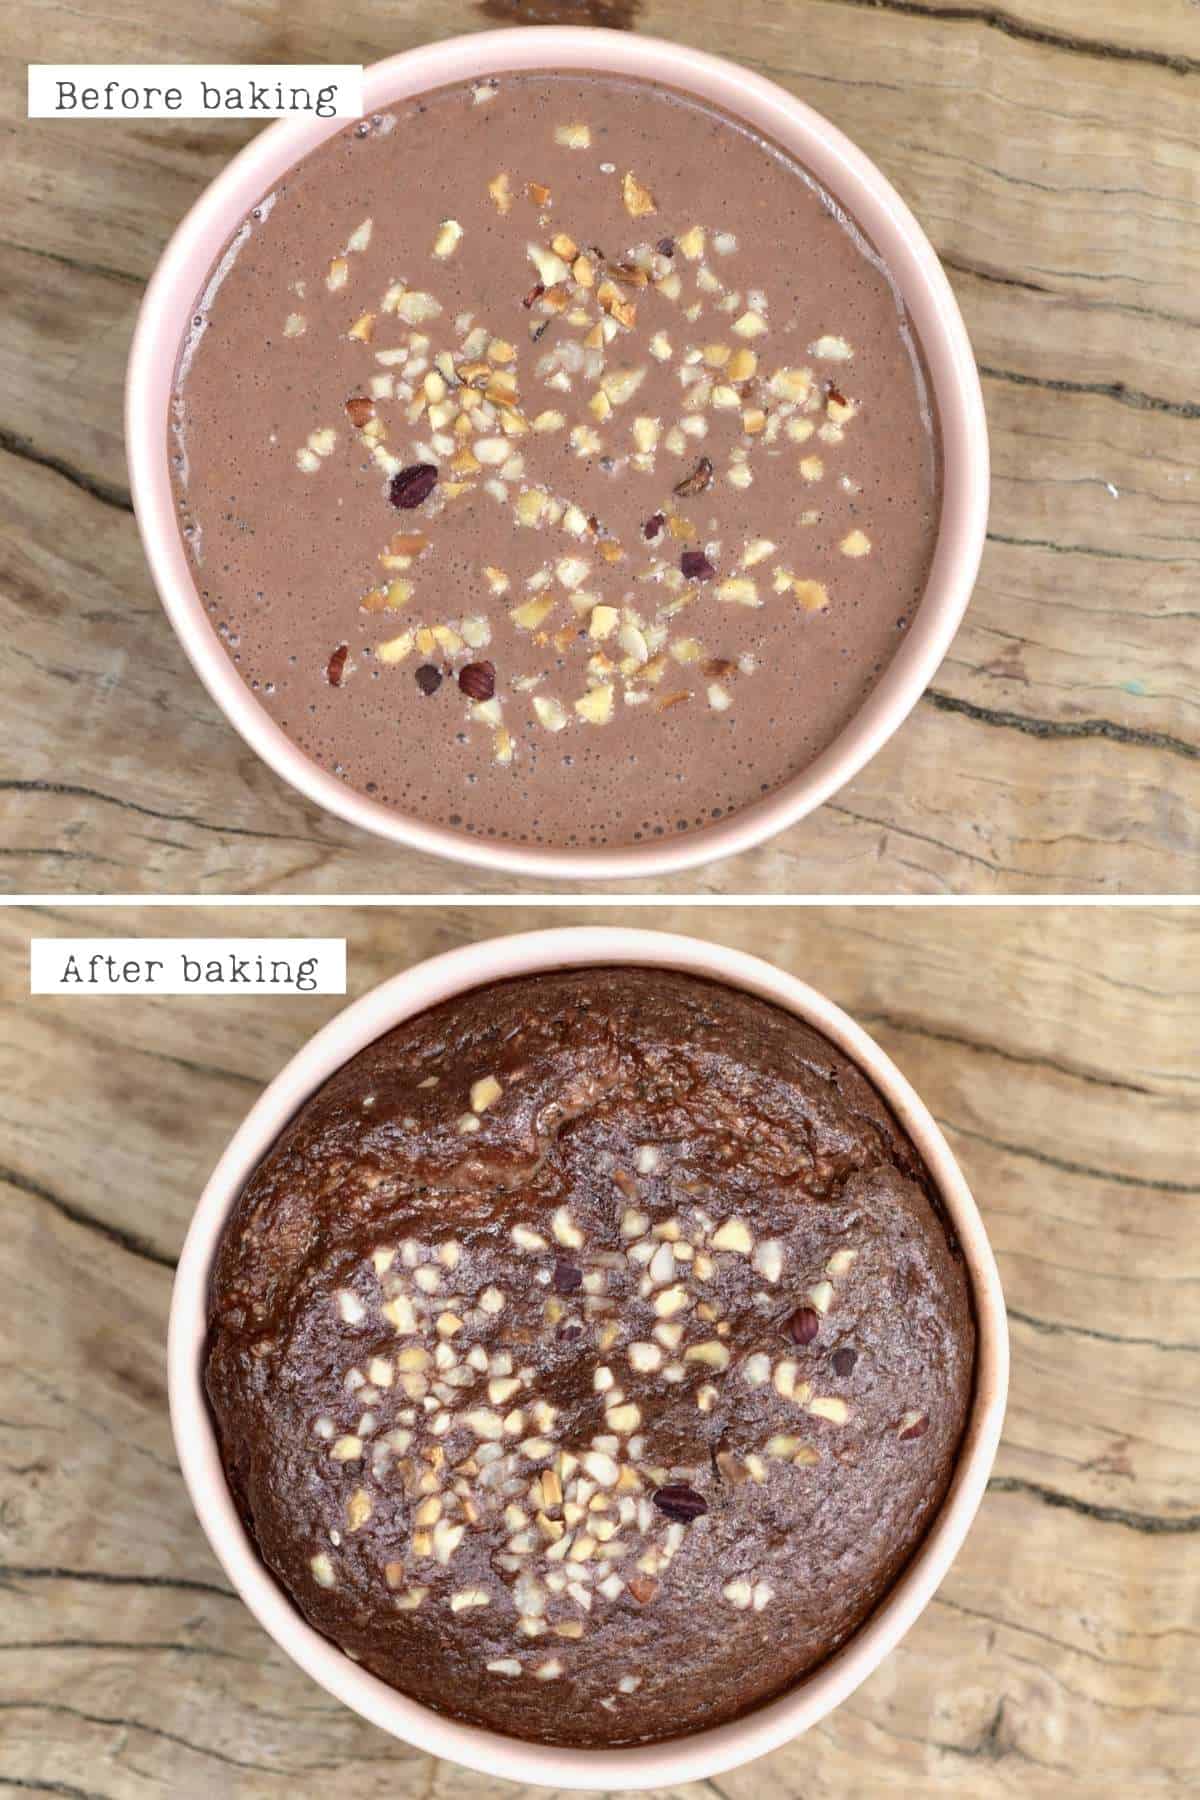 Before and after baking chocolate oats